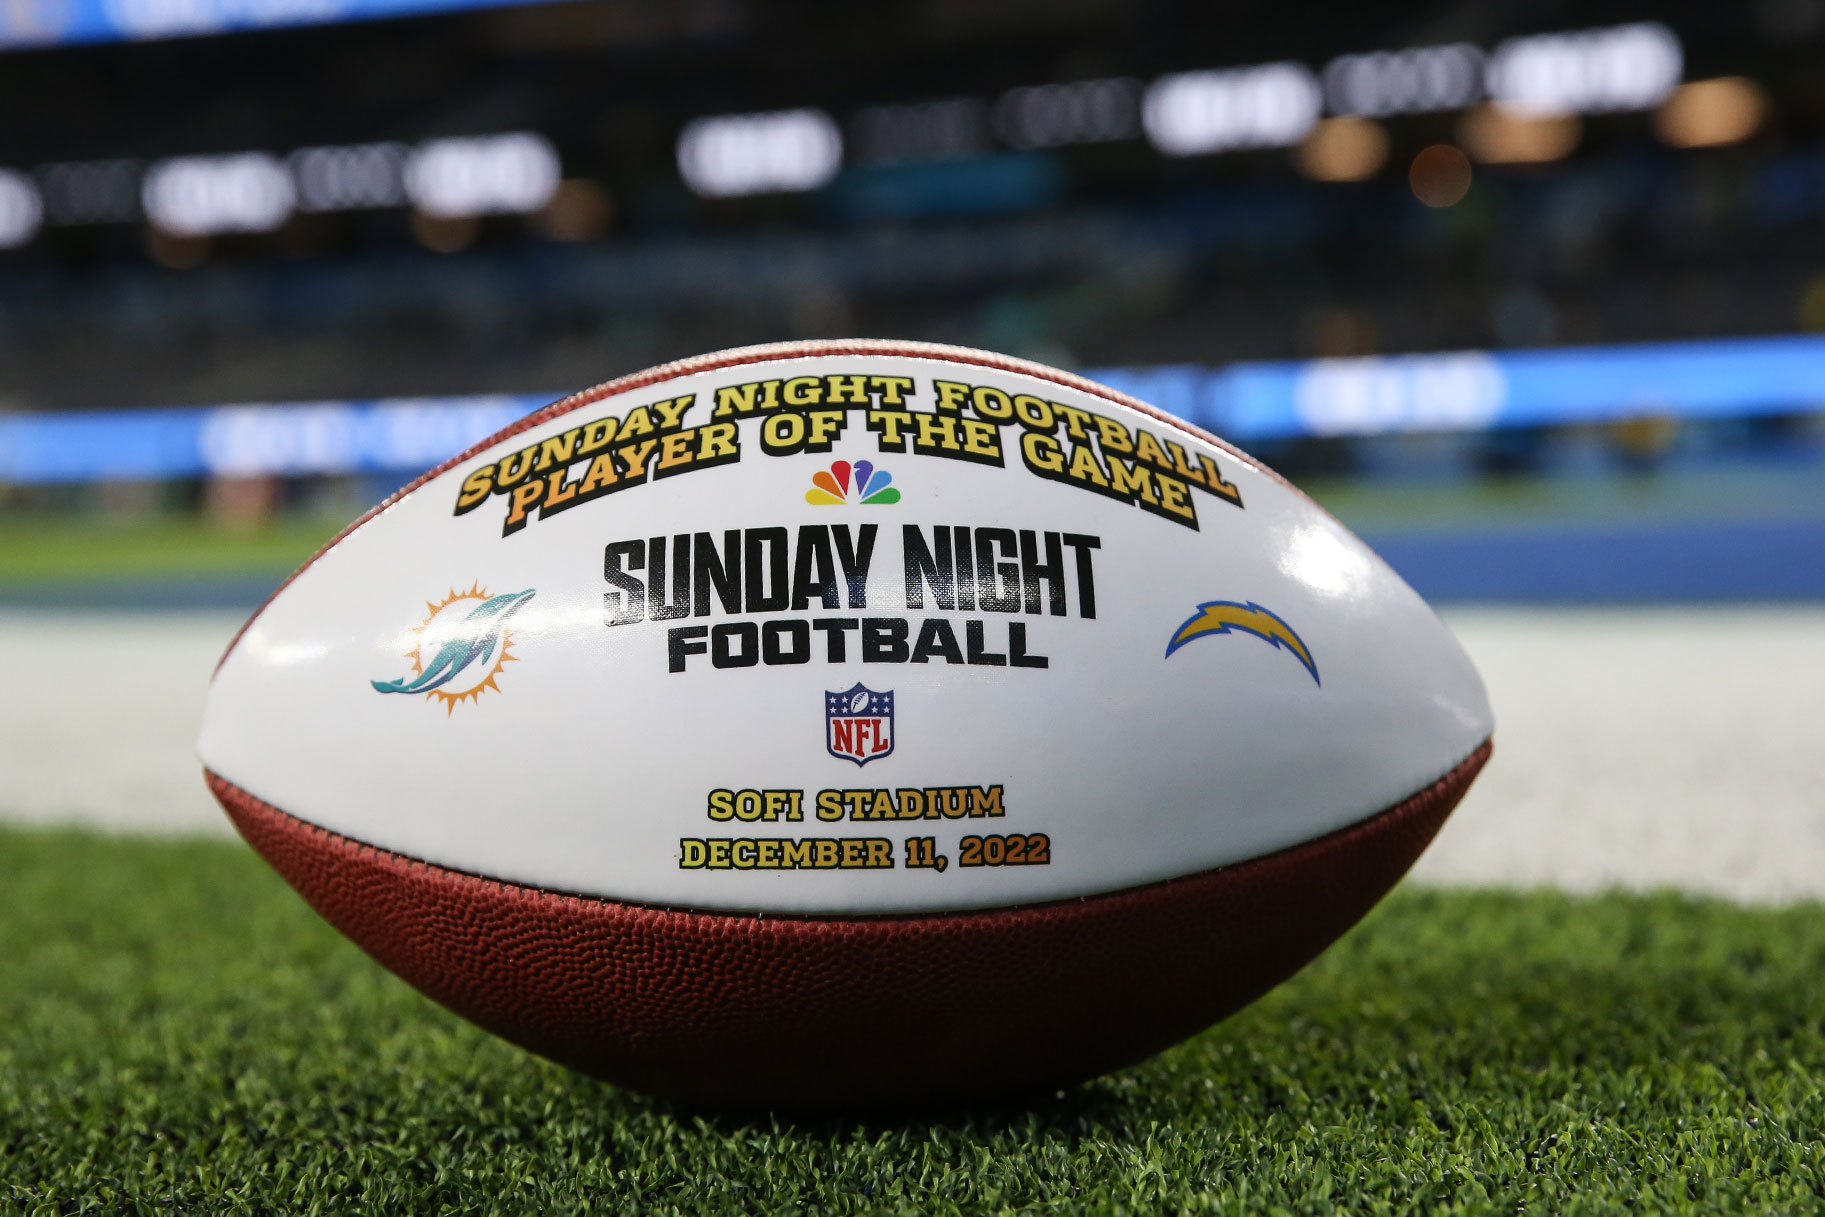 How to Watch Sunday Night Football on NBC and Peacock Cowboys vs